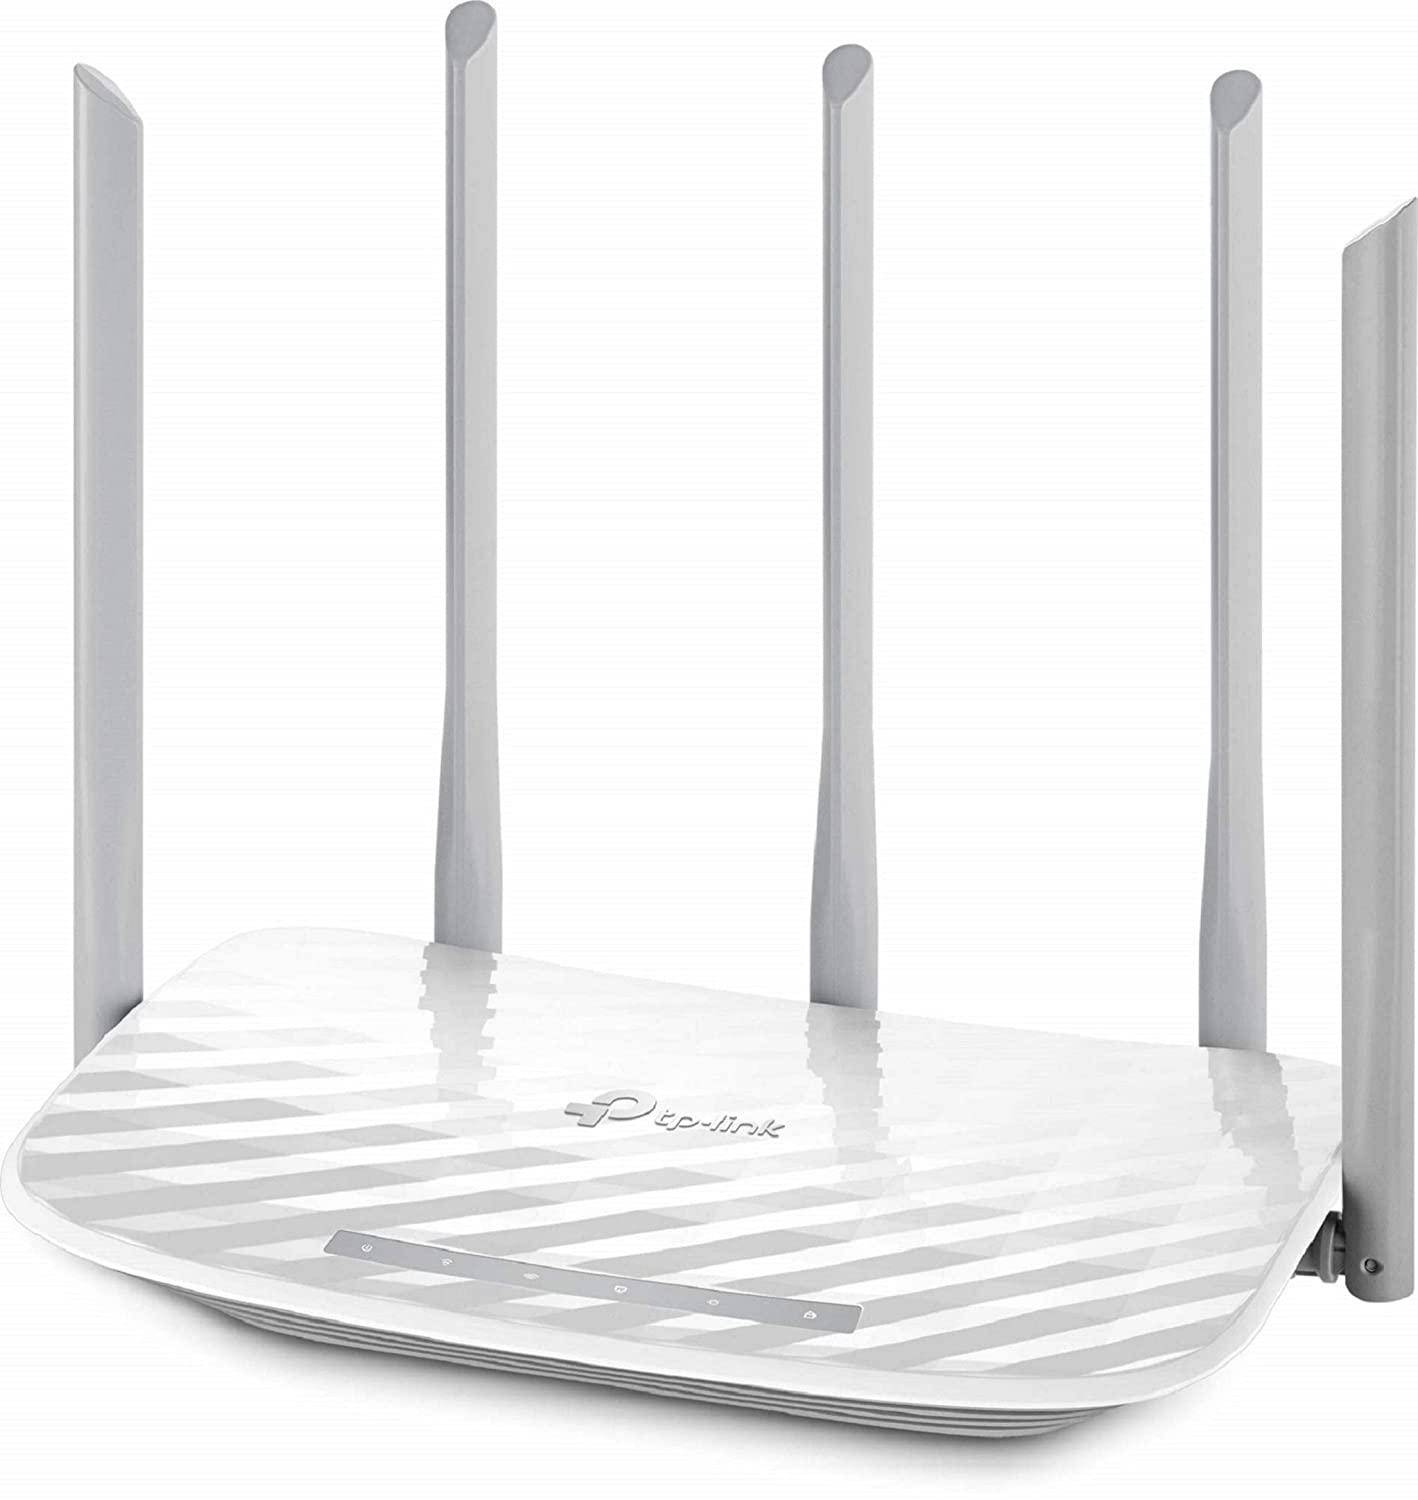 TP-Link Archer C60 AC1350 Dual Band Wi-Fi Router zoom image